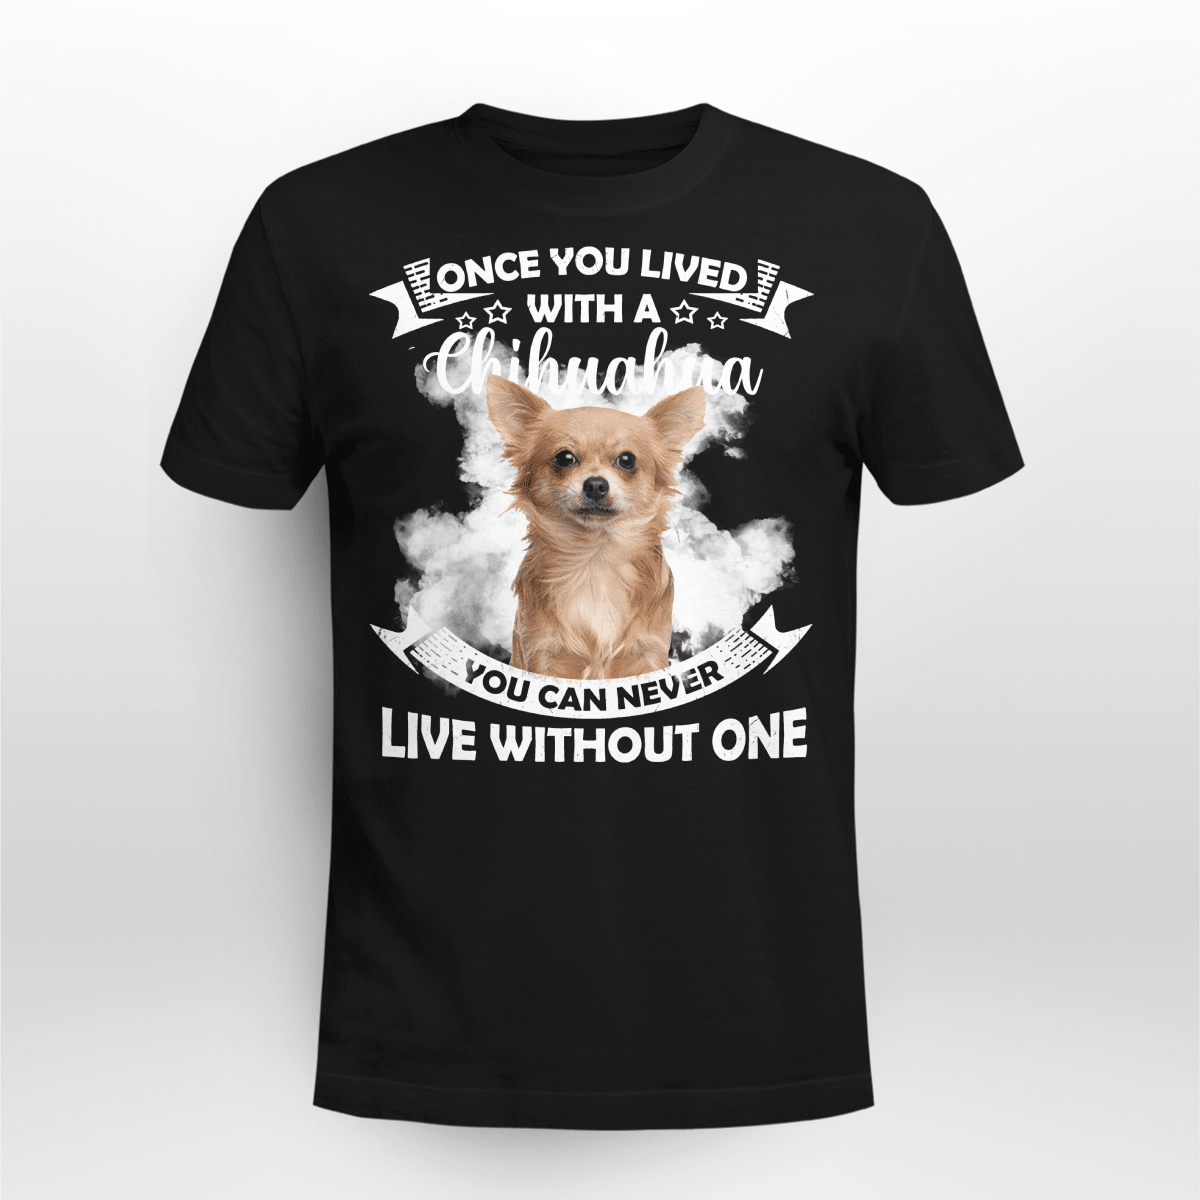 You can never live without Chihuahua